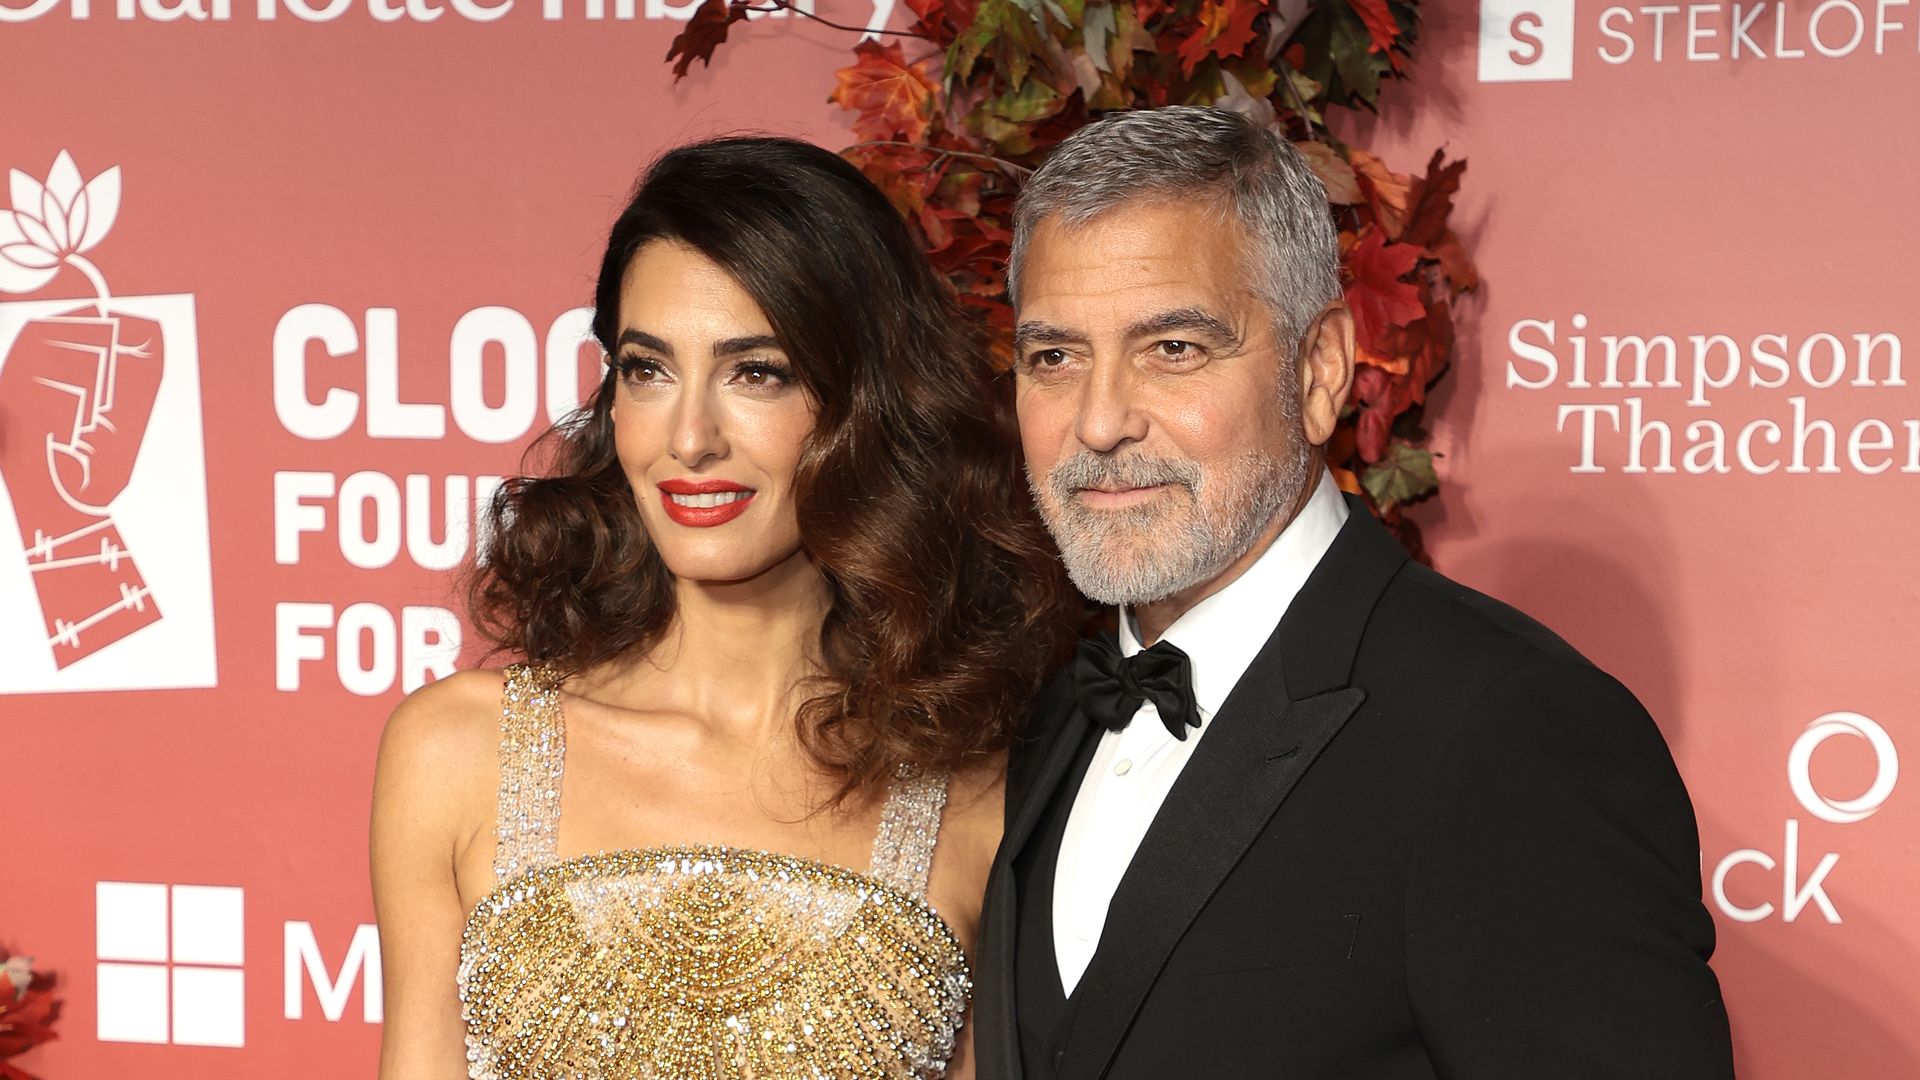 George Clooney's short-lived first marriage, Vegas wedding, and refusal to marry again before finding love with Amal Clooney